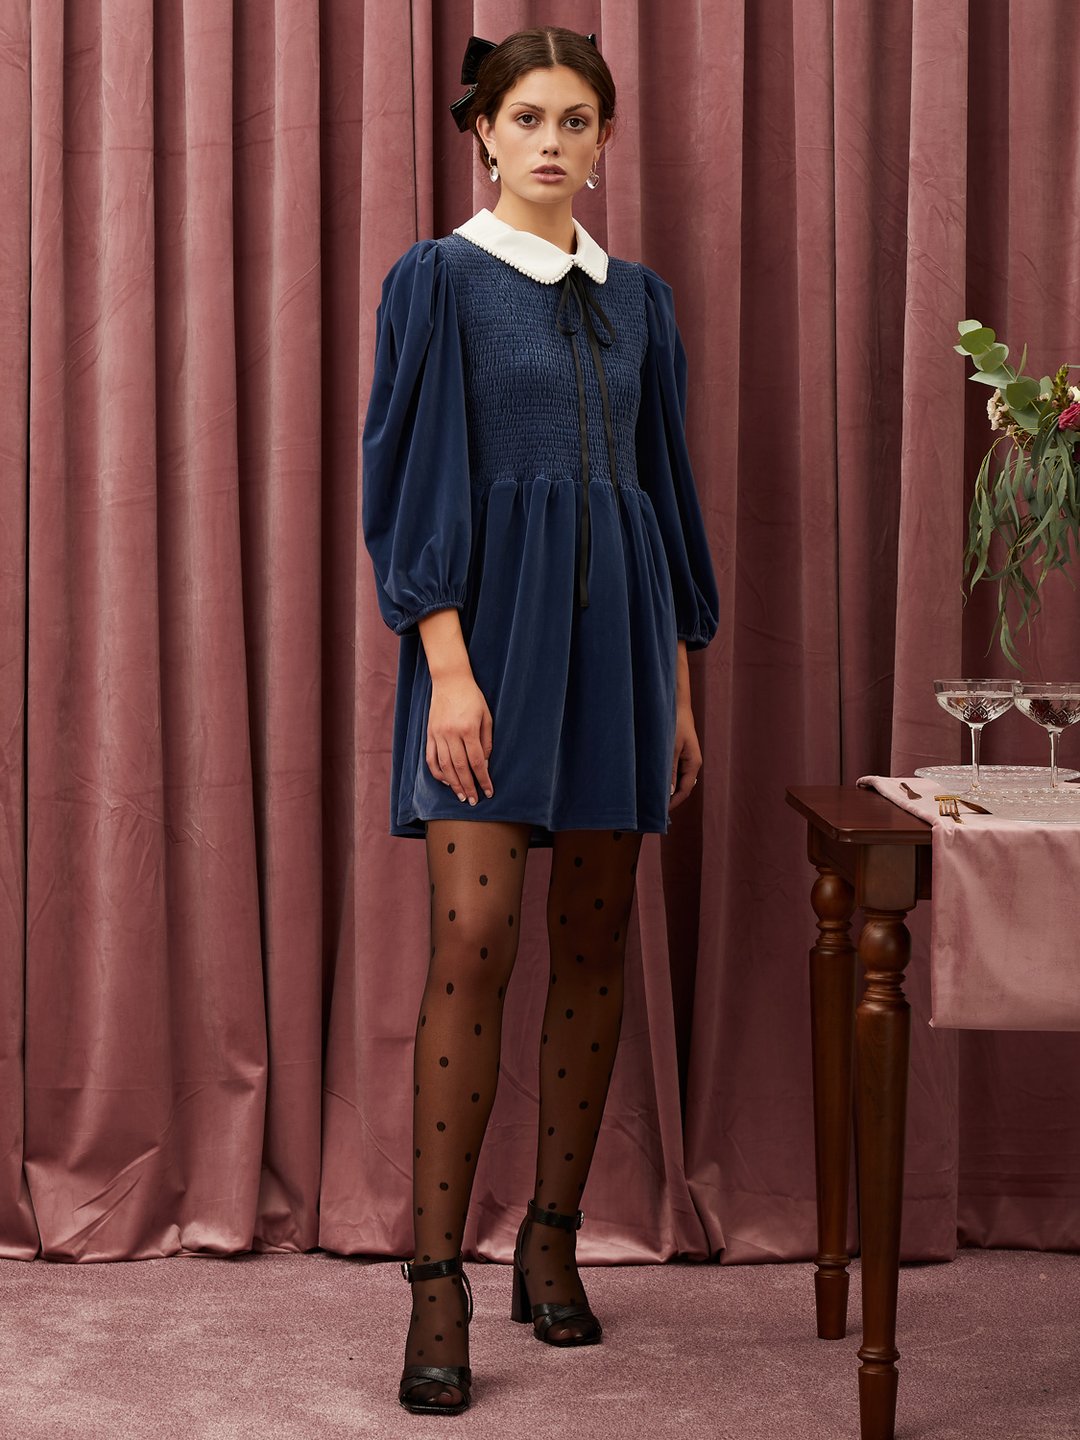 A model poses wearing a cocktail-length navy blue velvet mini dress, with long sleeves and a white collar. She stands in front of a wall of mauve velvet curtains.